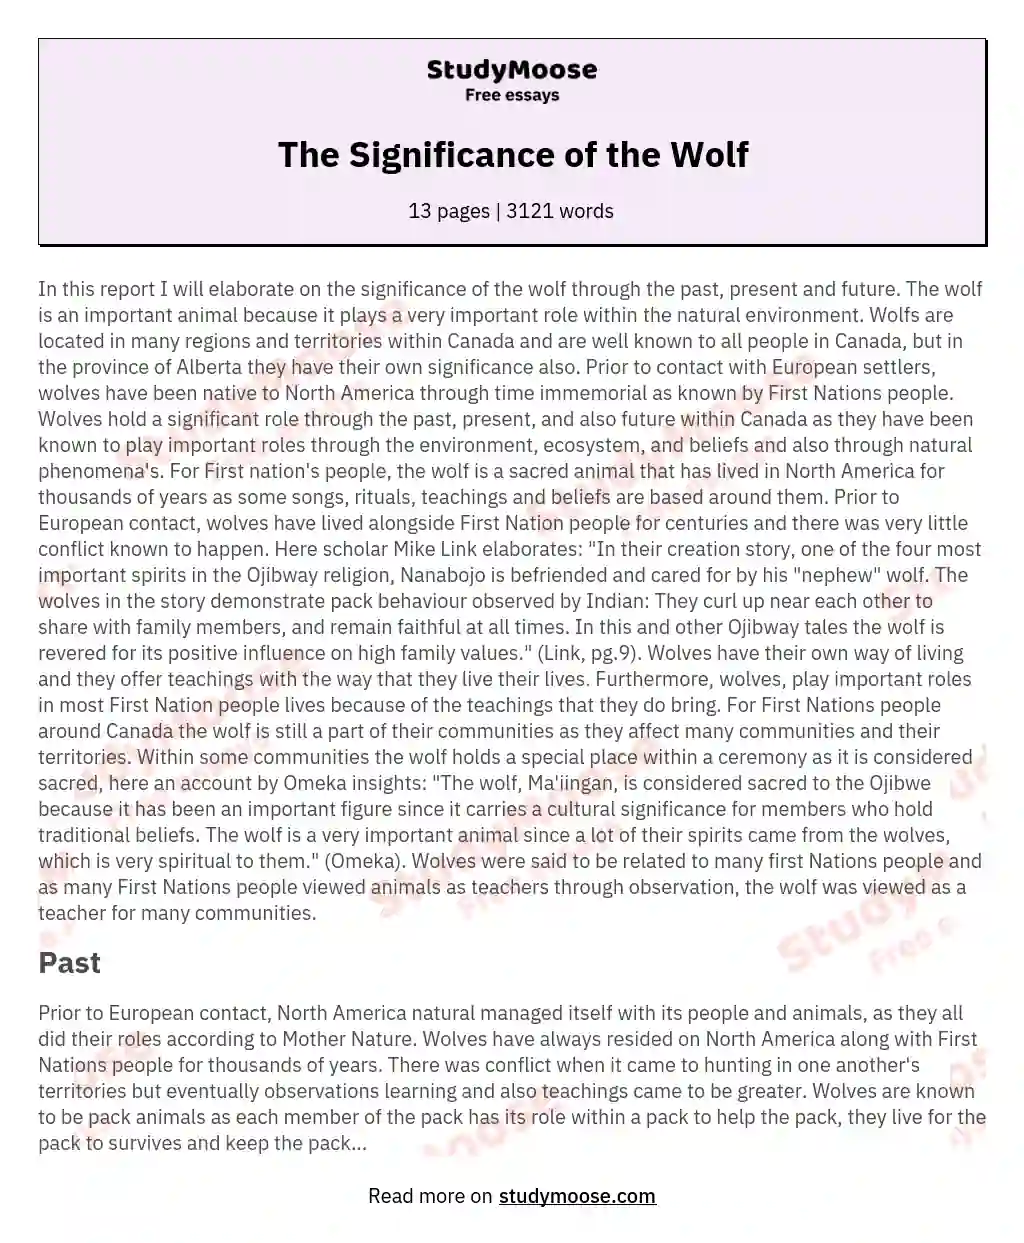 The Significance of the Wolf Free Essay Example